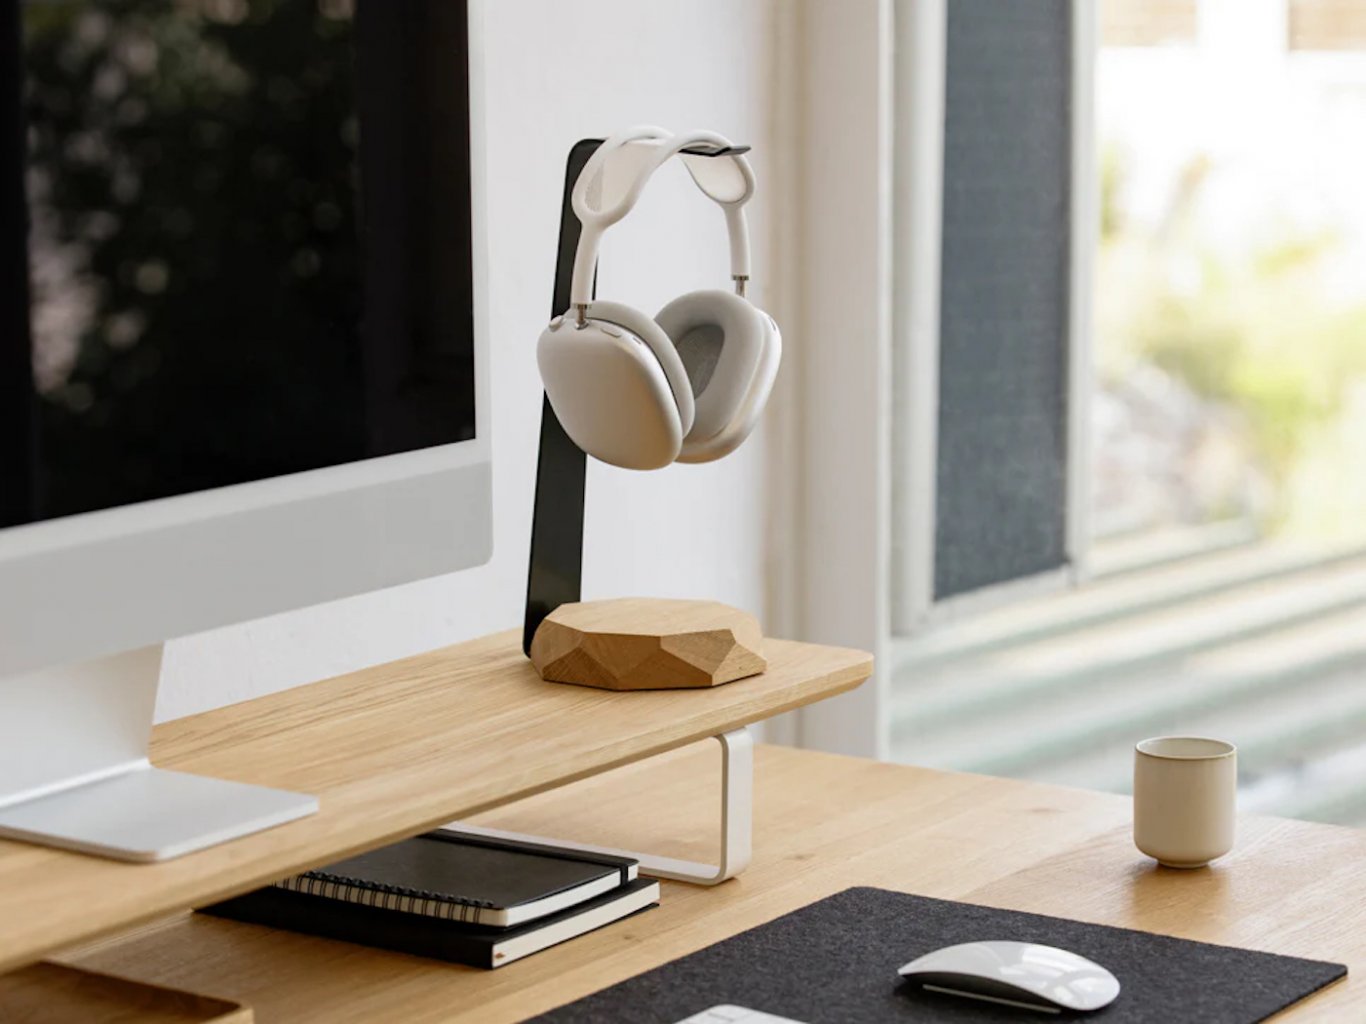 2-in-1 Headphone Stand from Oakywood – Rest your over-ear headphones and wirelessly charge your phone at the same time